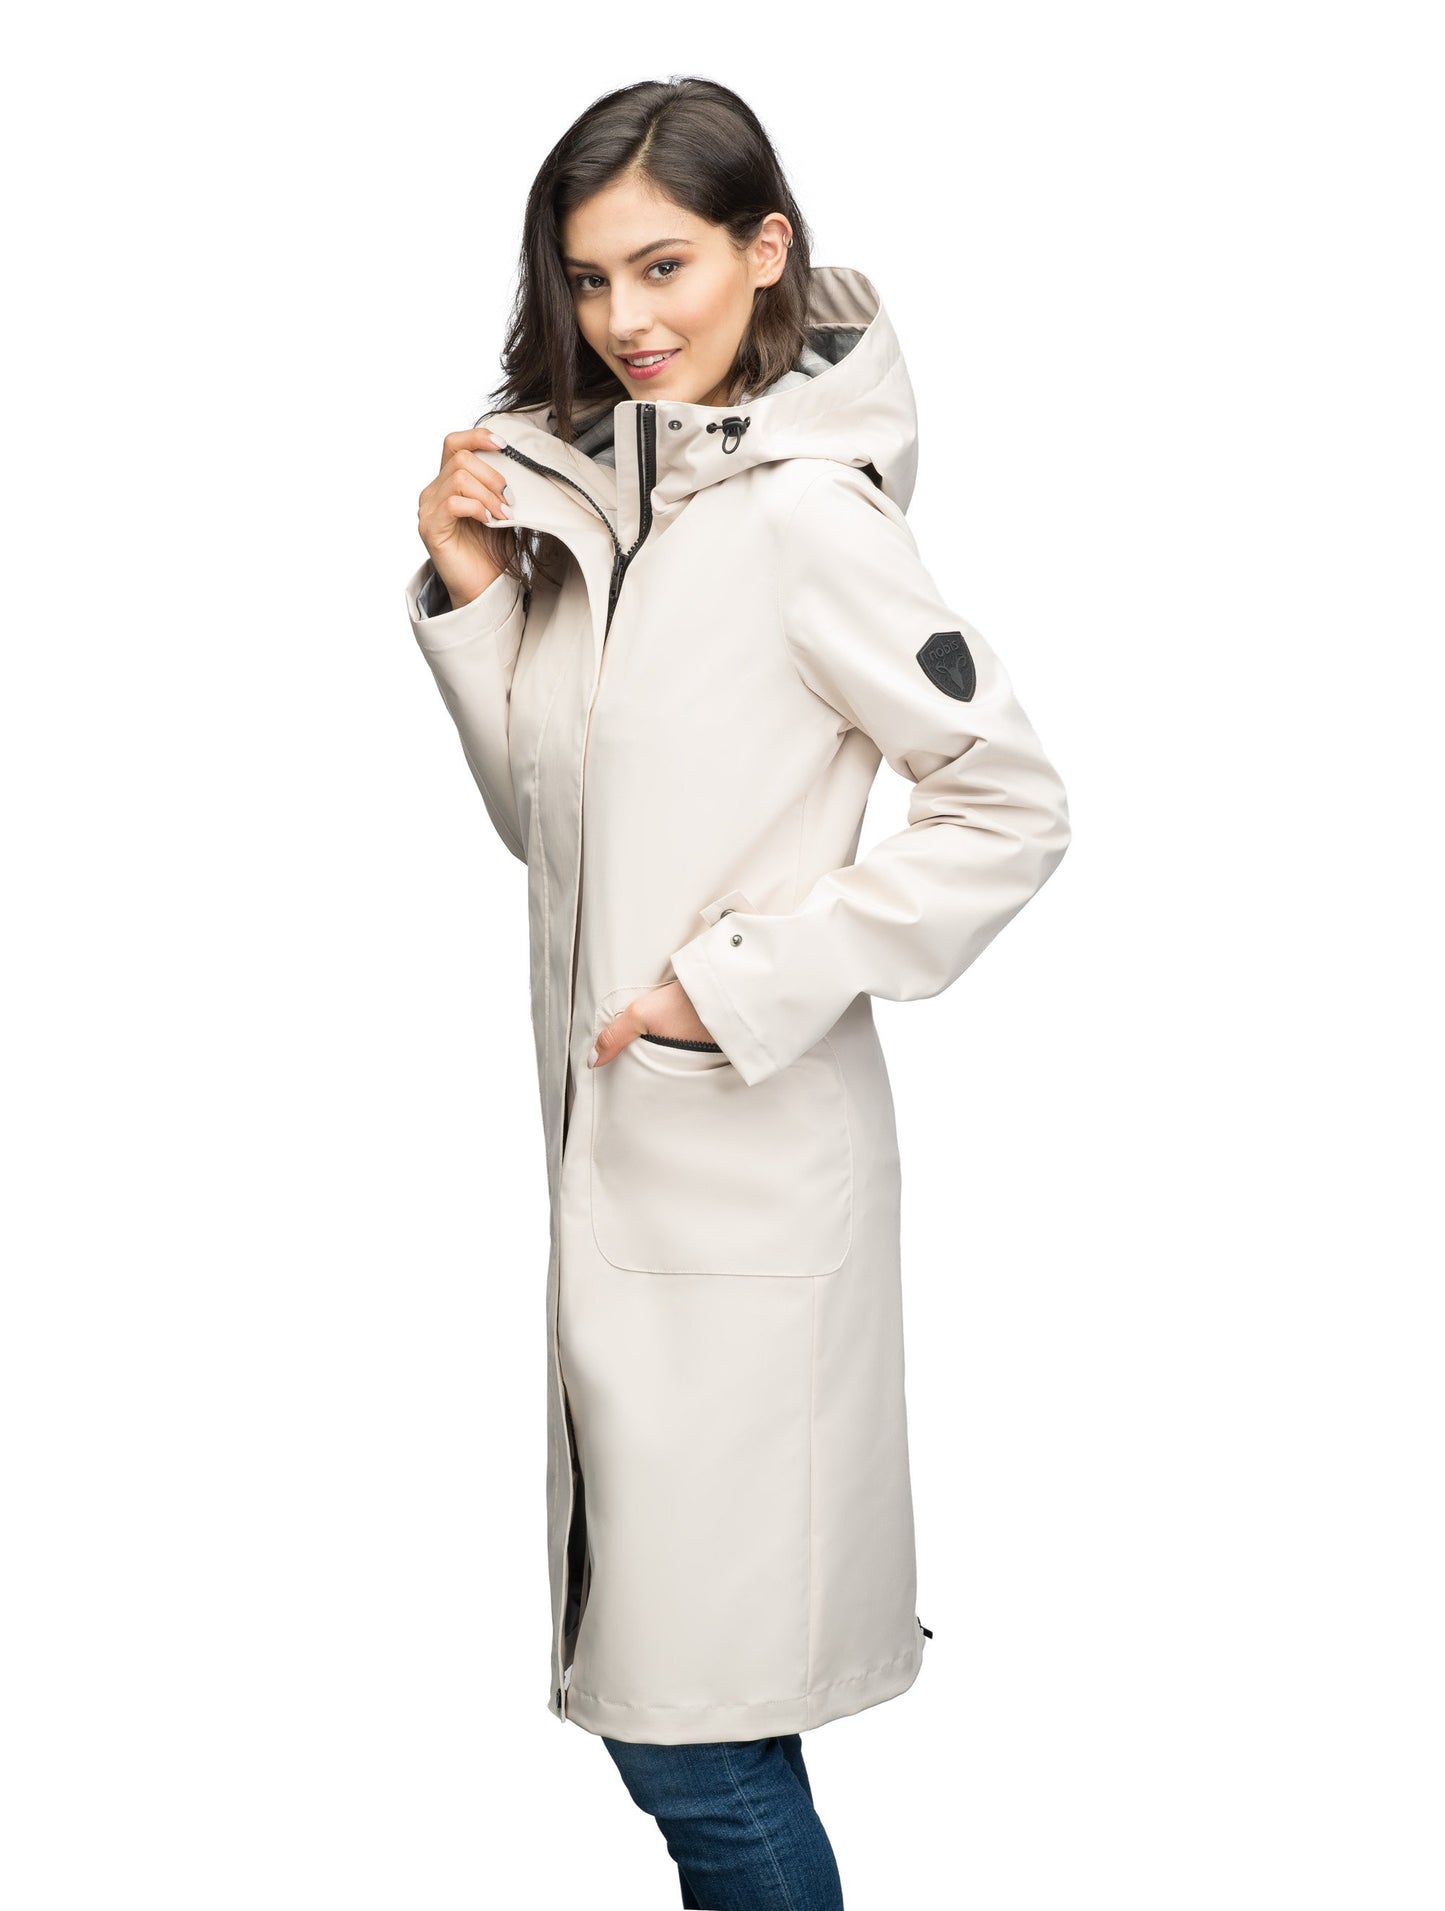 Women's long raincoat with an adjustable hood in Camel